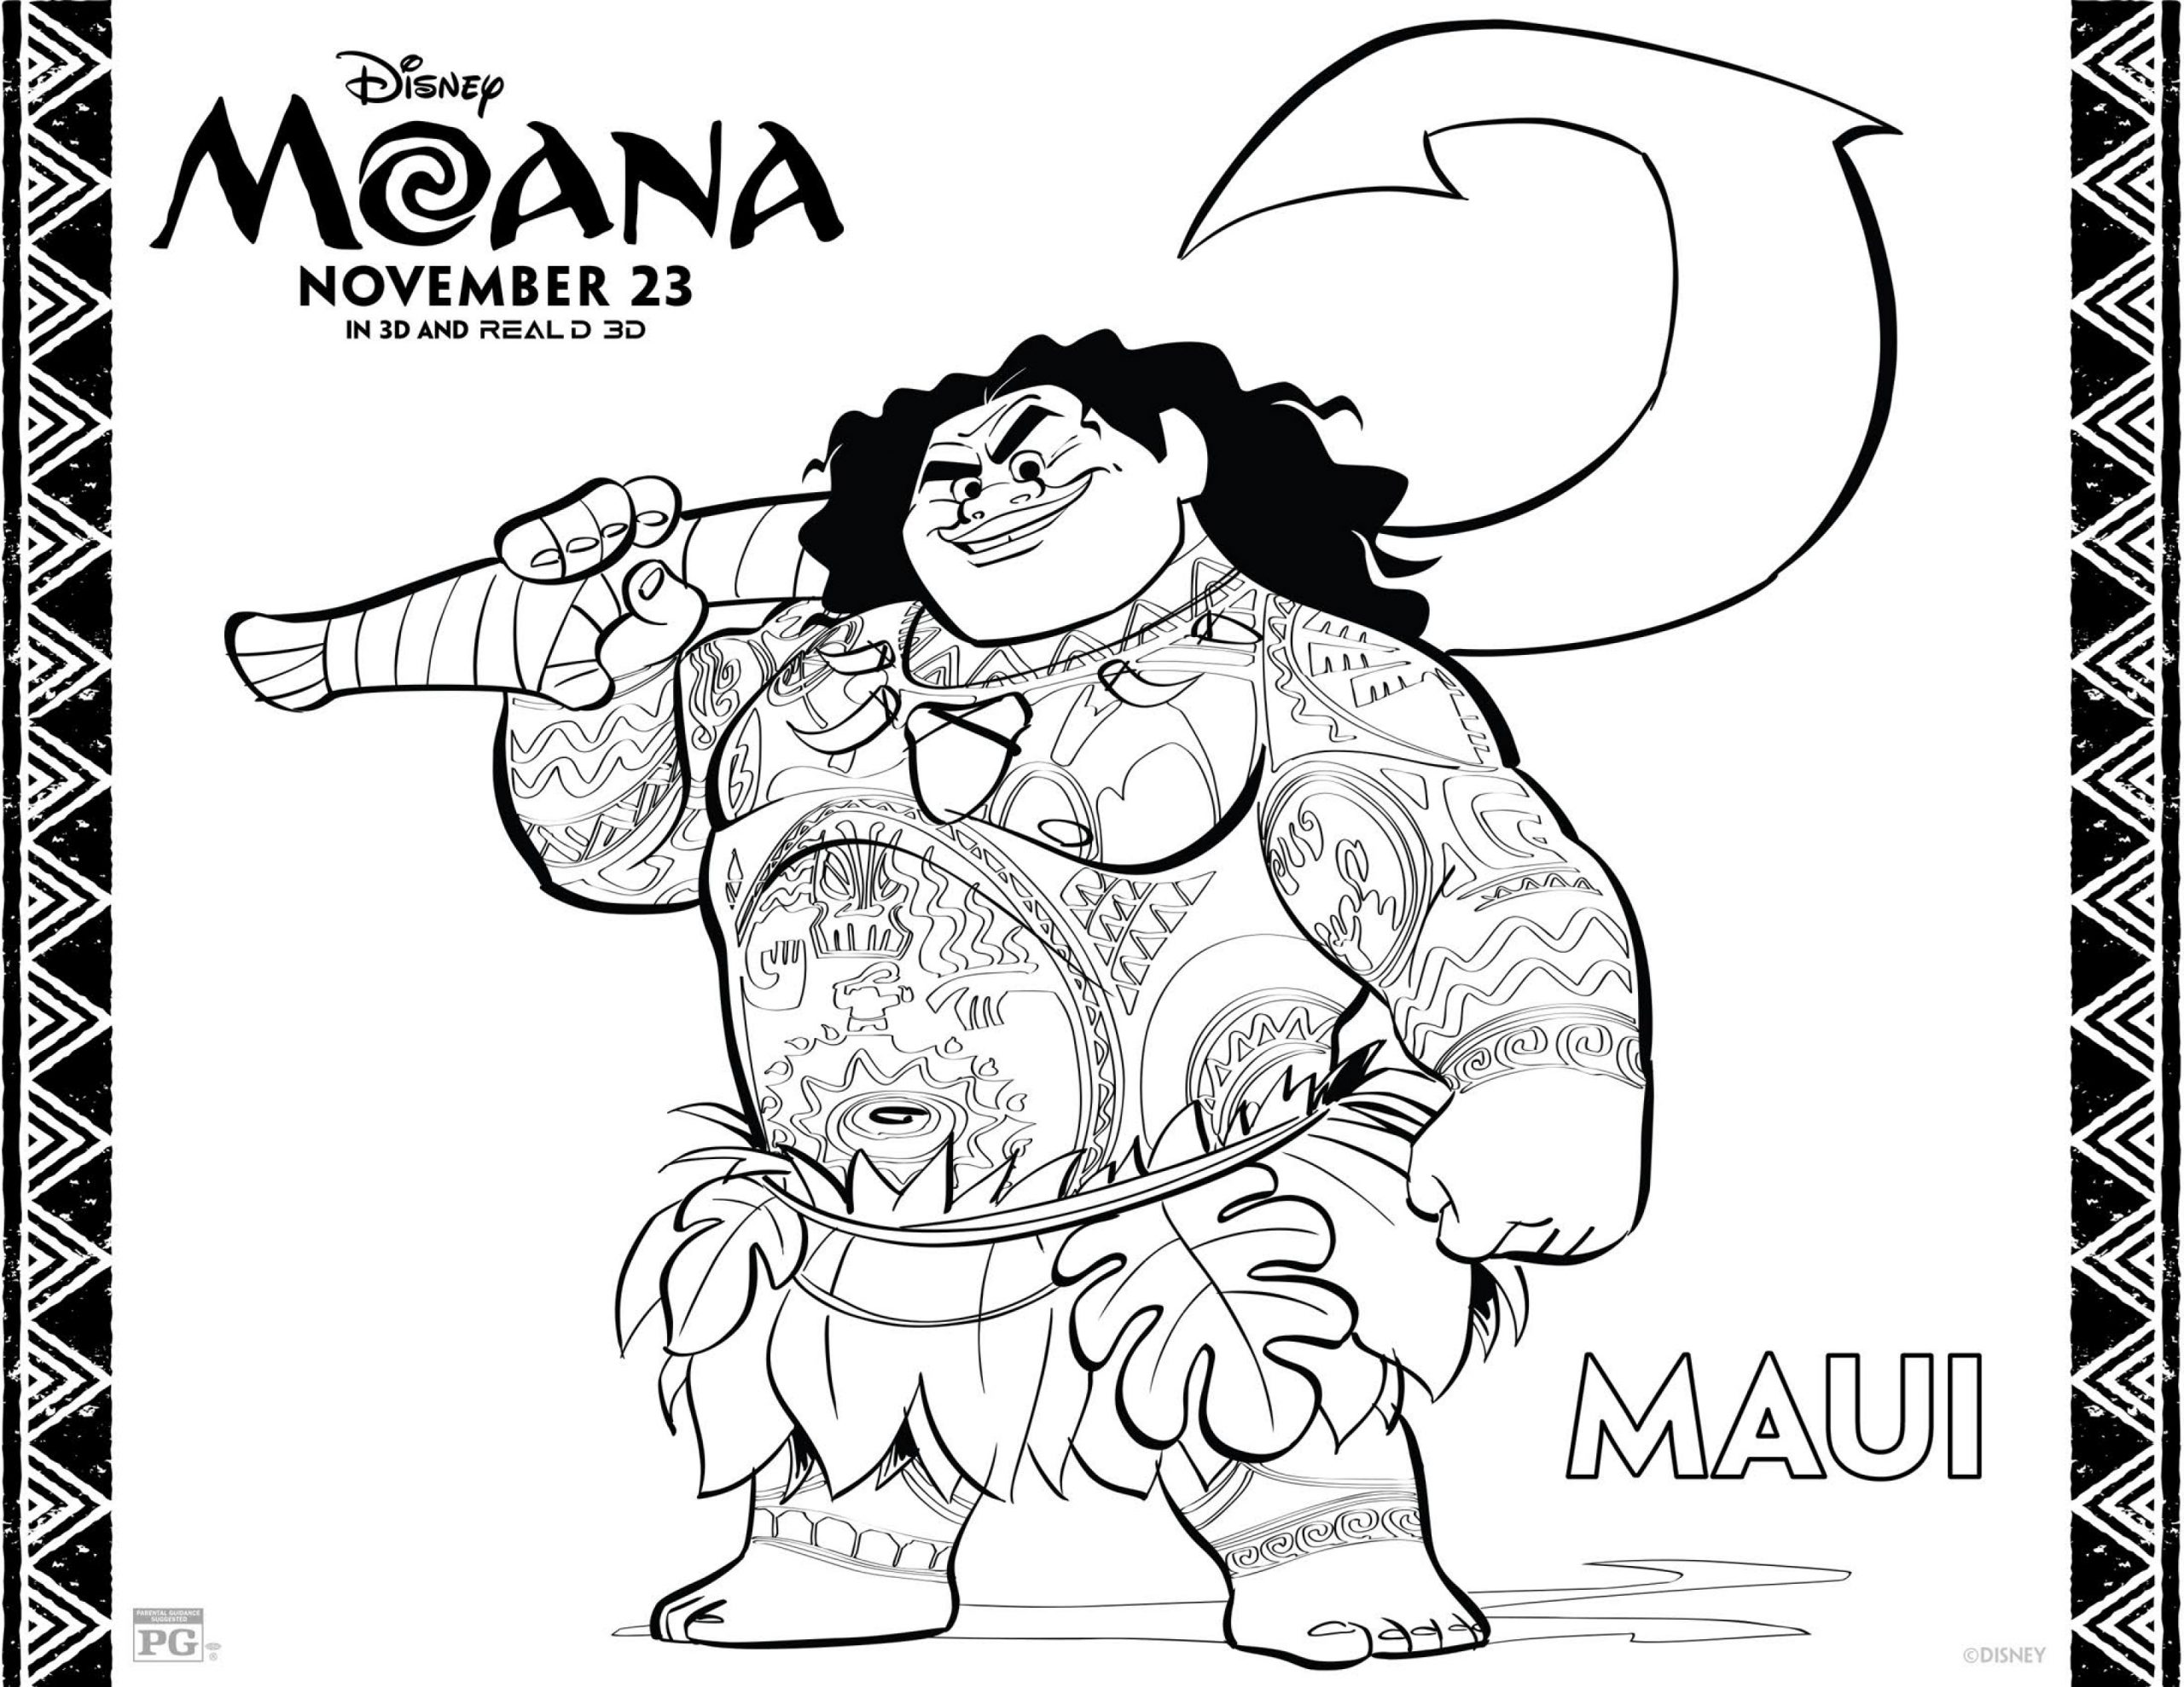 Coloring pages ideas : Outstanding Baby Moana Coloringe Printable ...